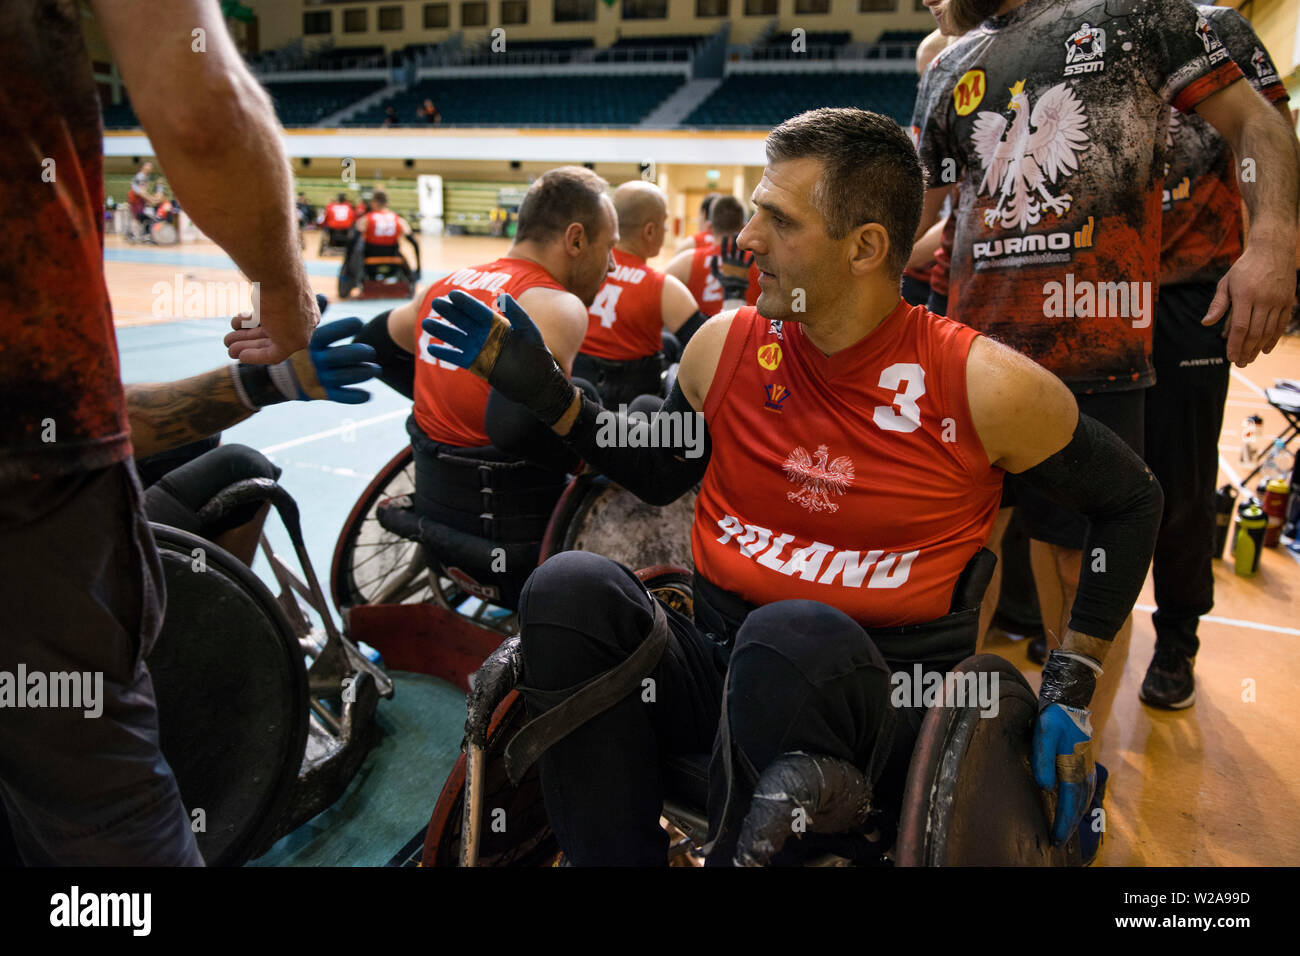 Players greet each other with hi-fives, after the game.The French National Team beat the Germans, 42:47 during the final and won the Metro Cup for the second time. The Metro Cup is the largest international Wheelchair Rugby Tournament in Poland. On 4-6 July 2019, the seventh edition of this event was held at the Ursynów Arena in Warsaw. Wheelchair rugby is a Paralympic sports discipline for people with spinal cord injury in the cervical segment and people with leg disorders. Stock Photo